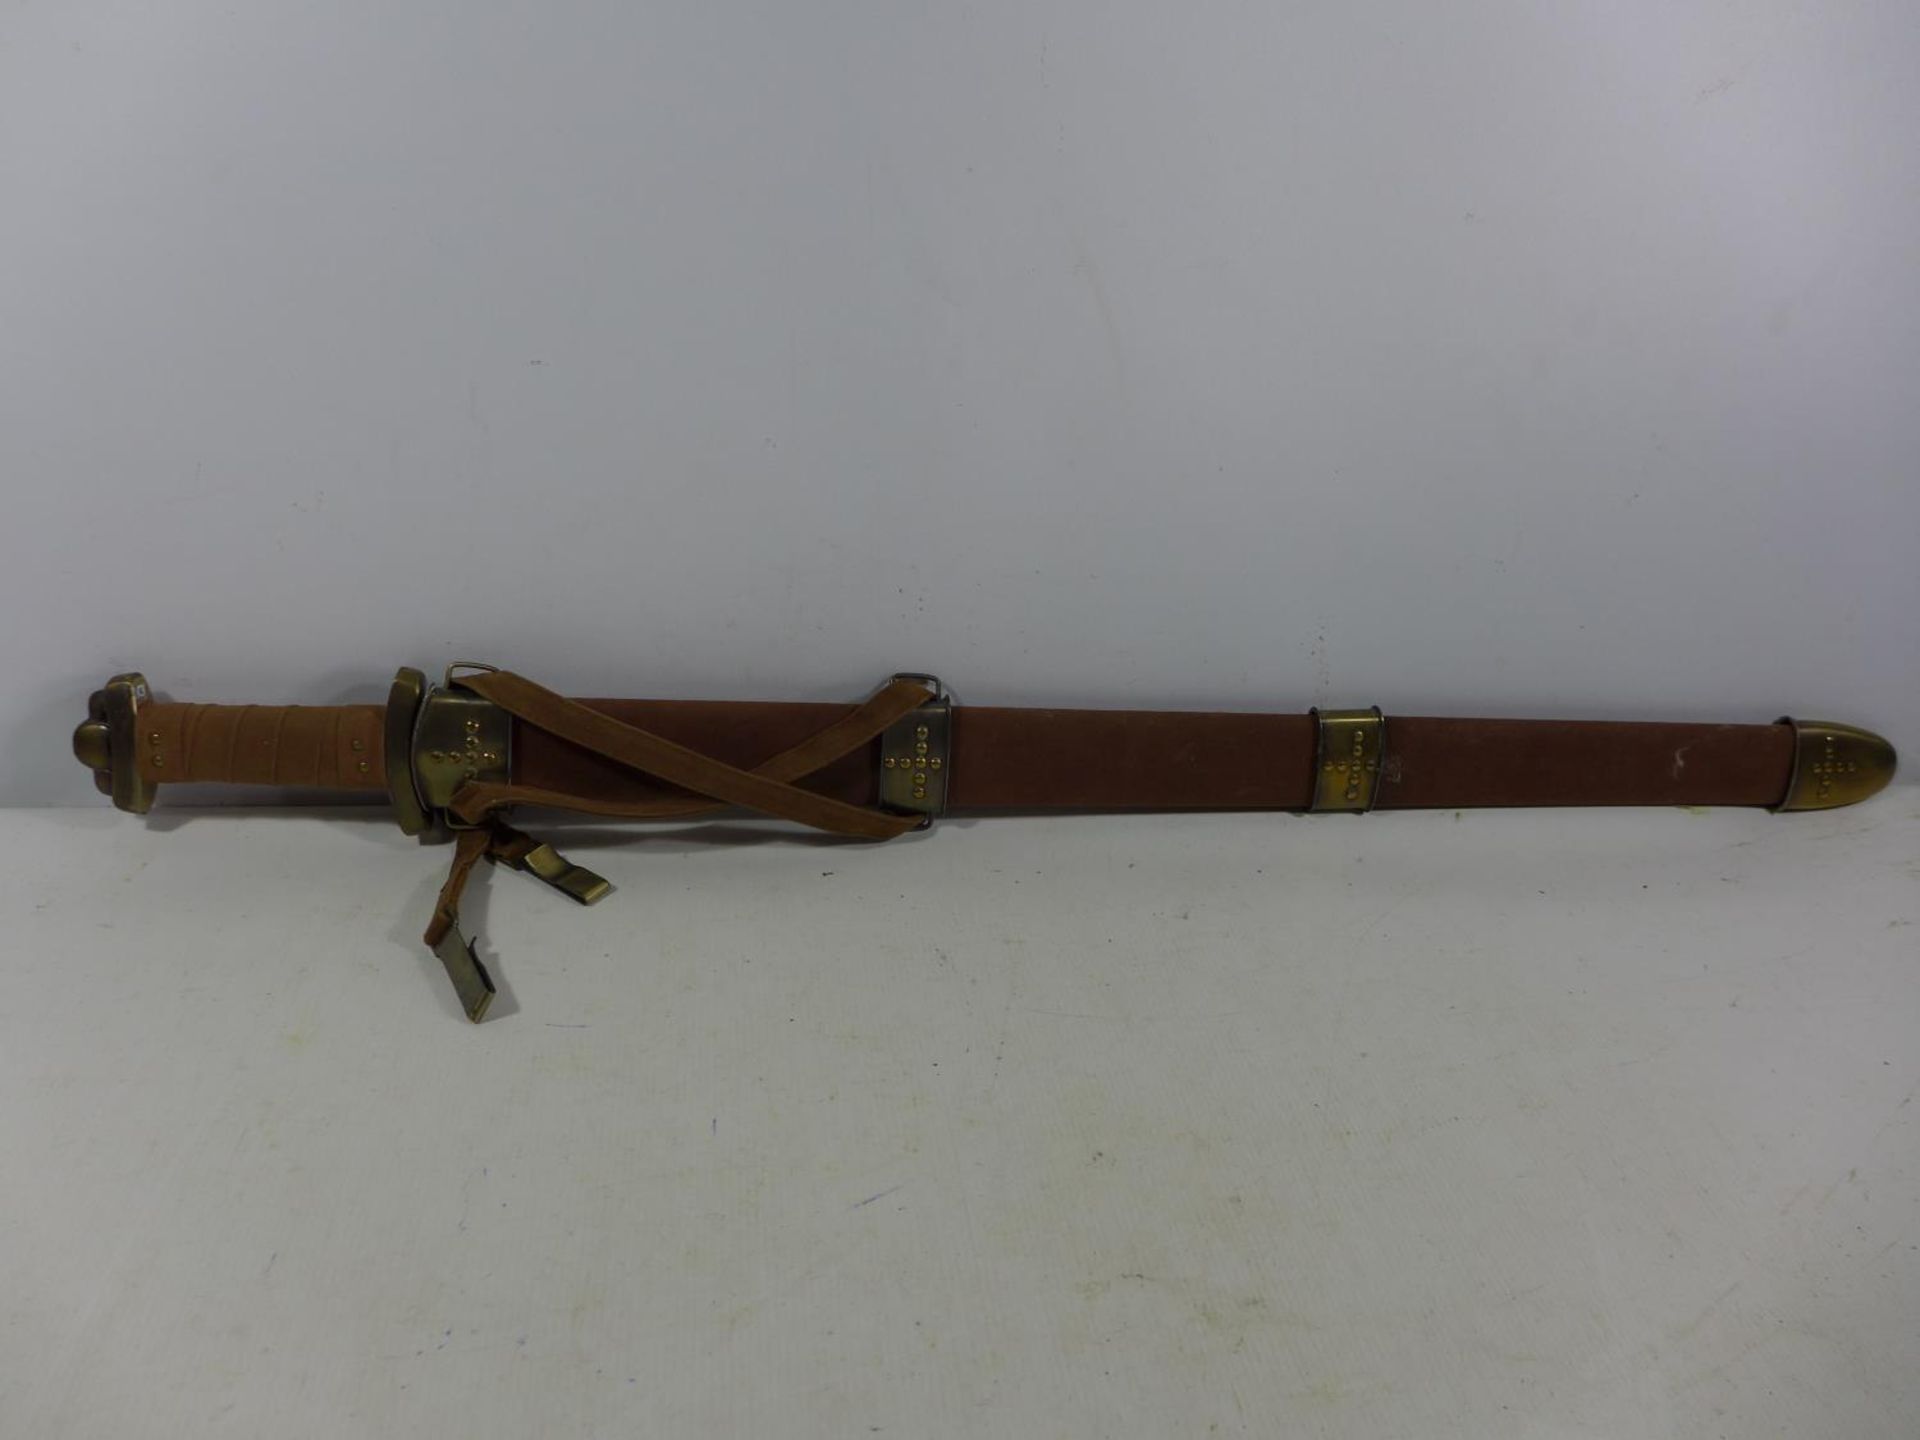 A GOOD QUALITY MODERN DISPLAY VIKING SWORD AND SCABBARD, 73CM BLADE, LENGTH 94CM - Image 4 of 4